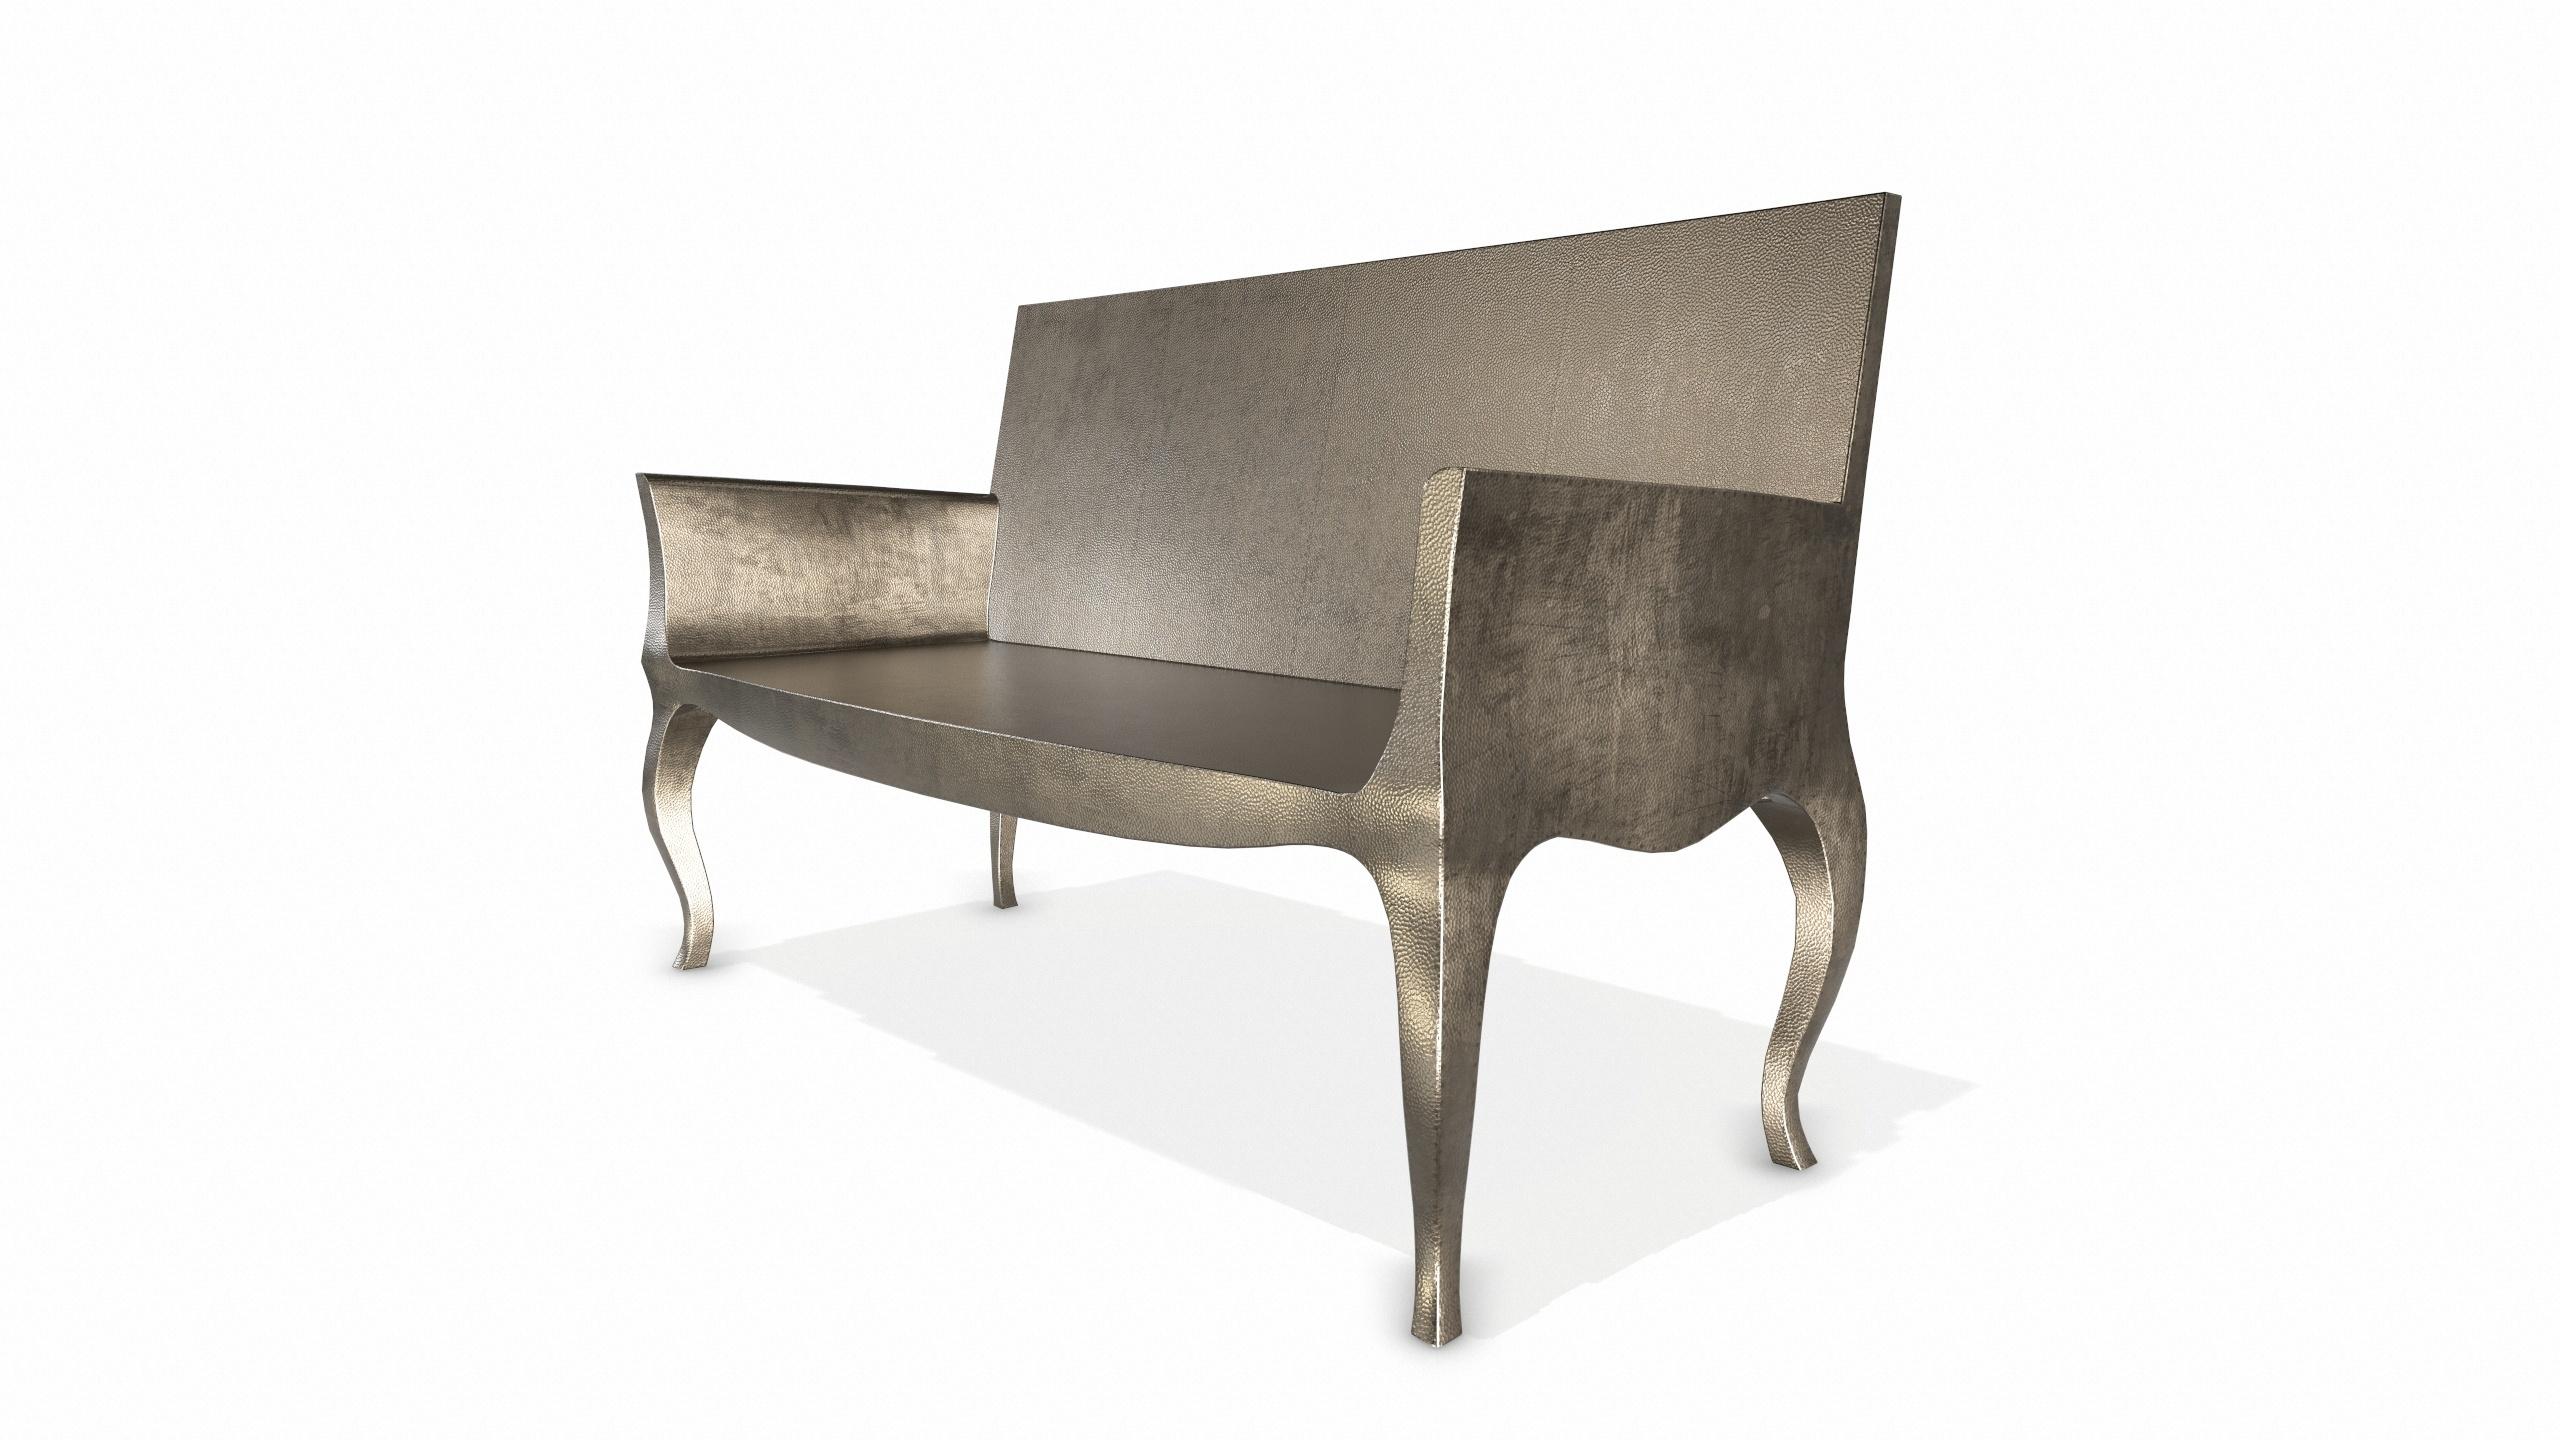 Woodwork Louise Settee Art Deco Benches in Mid. Hammered Antique Bronze by Paul Mathieu For Sale